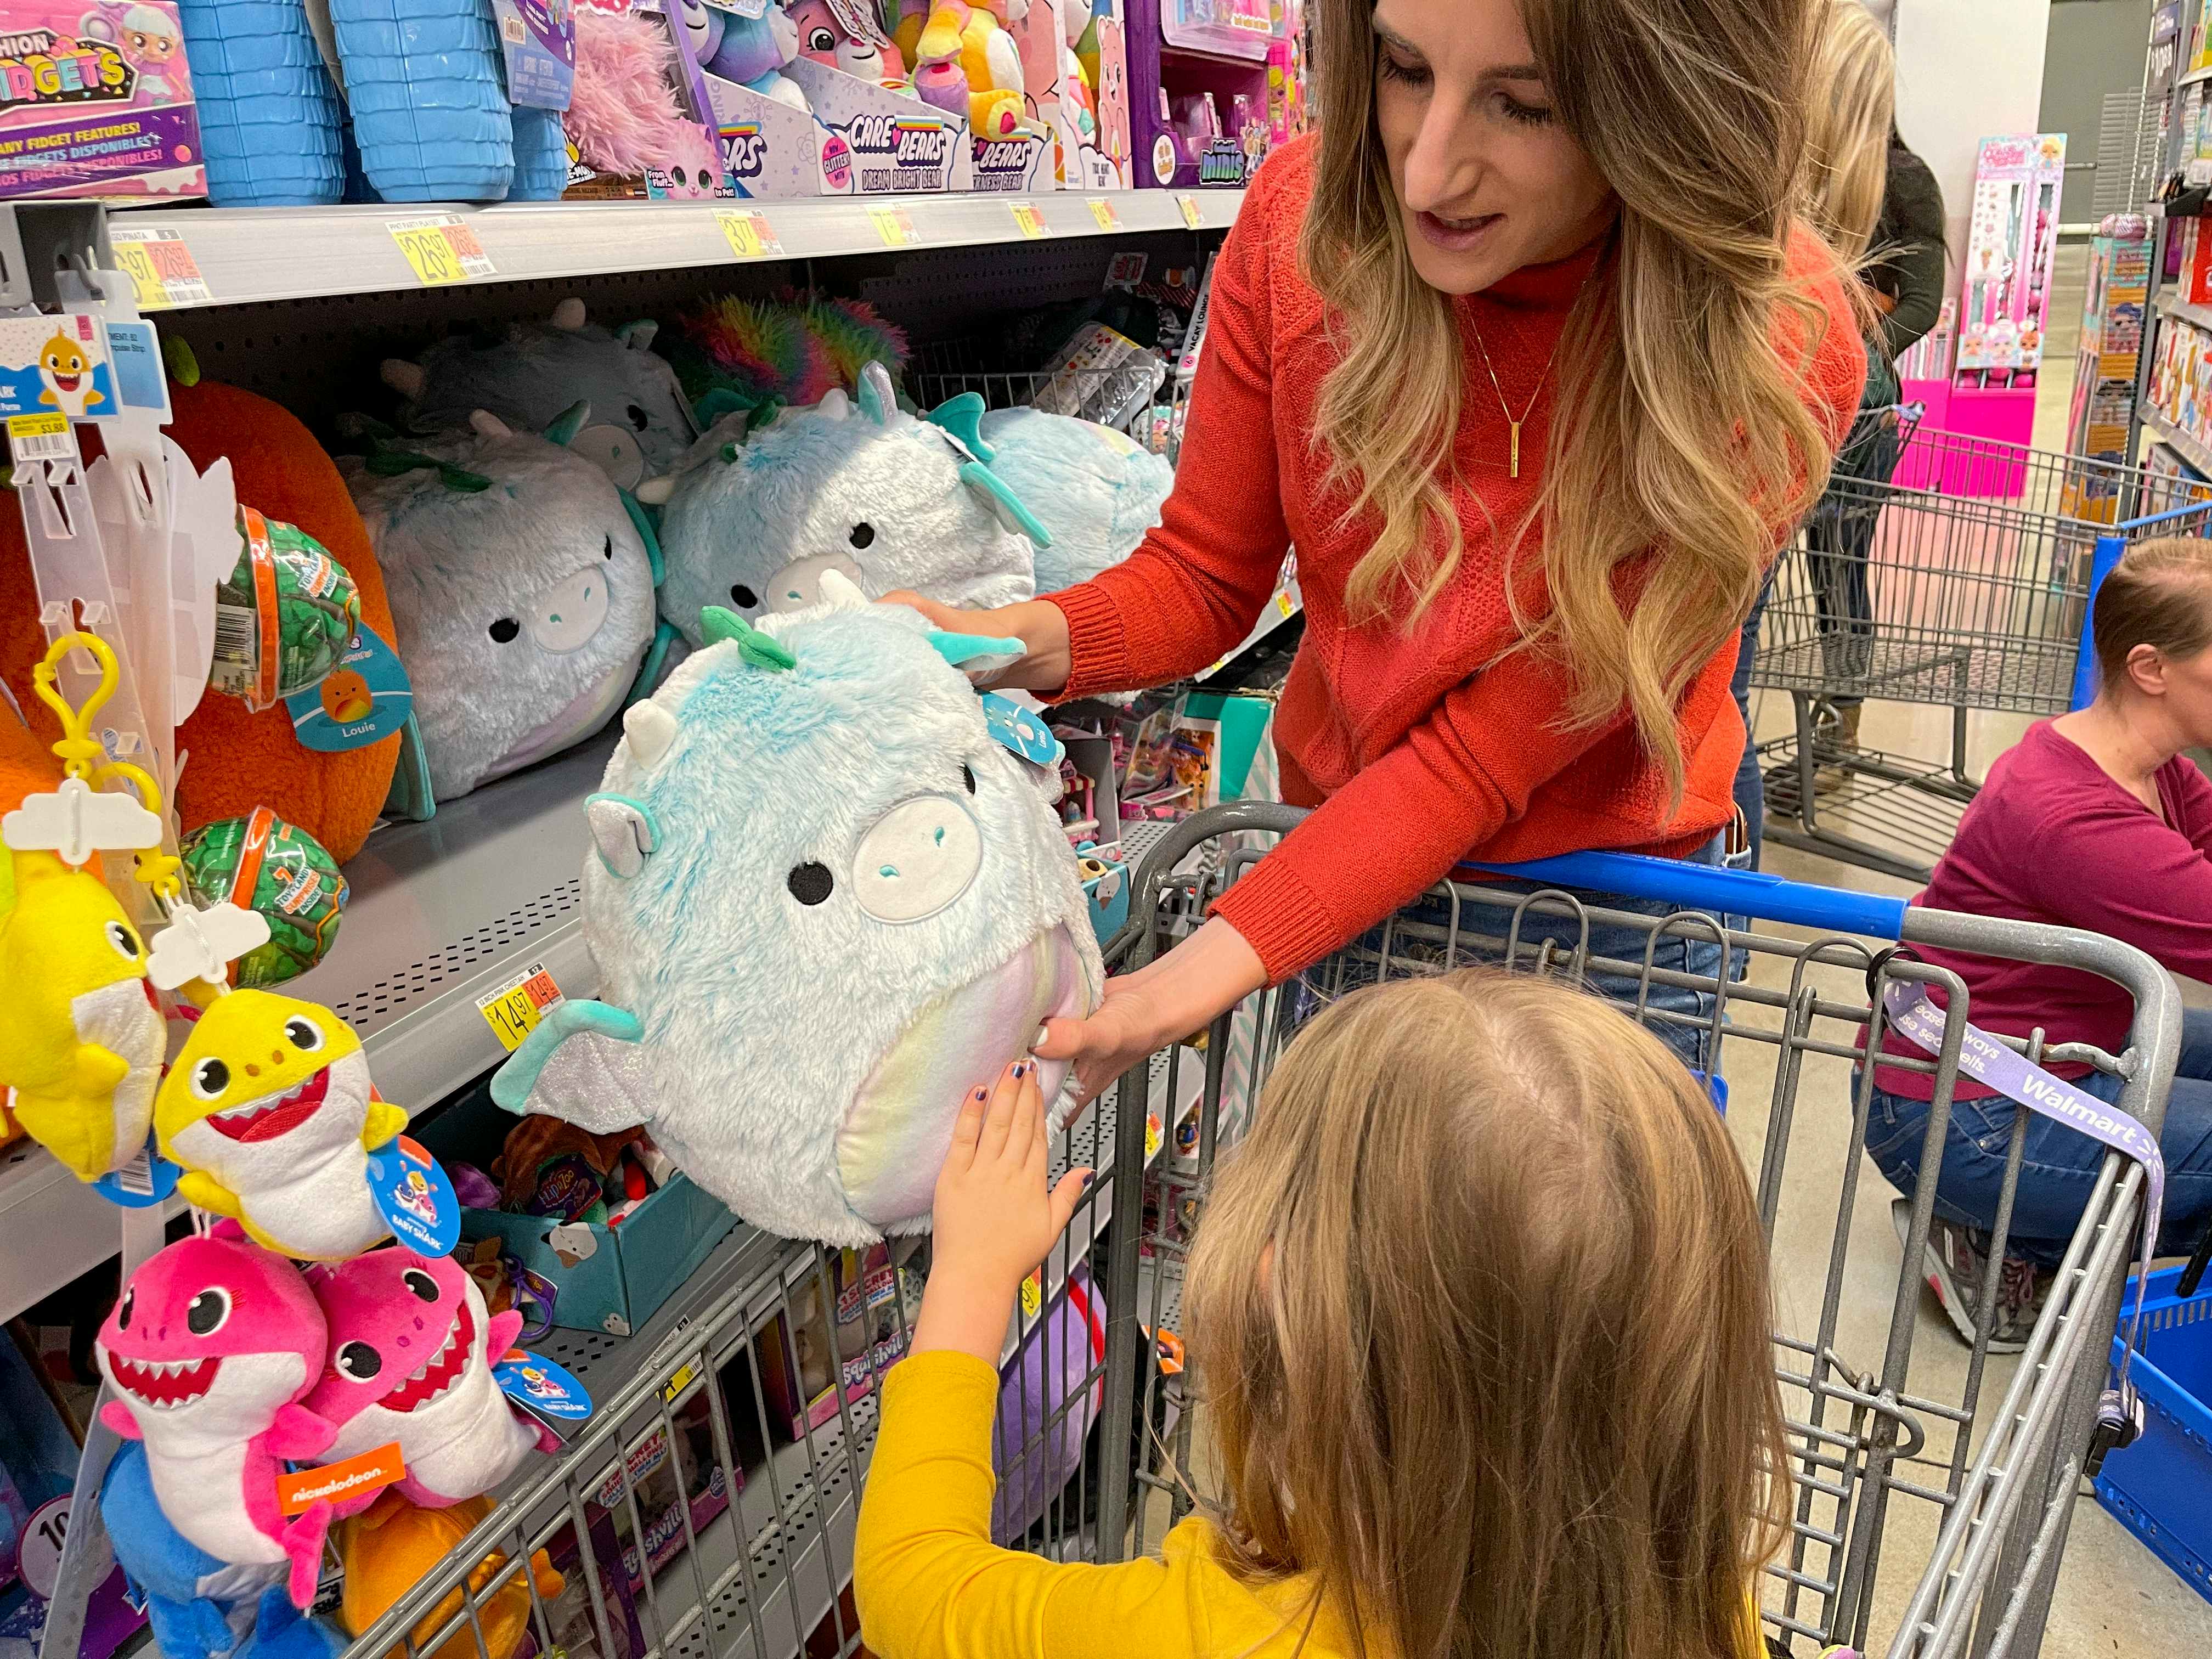 A woman showing a squishmallow to a little girl in a shopping cart.